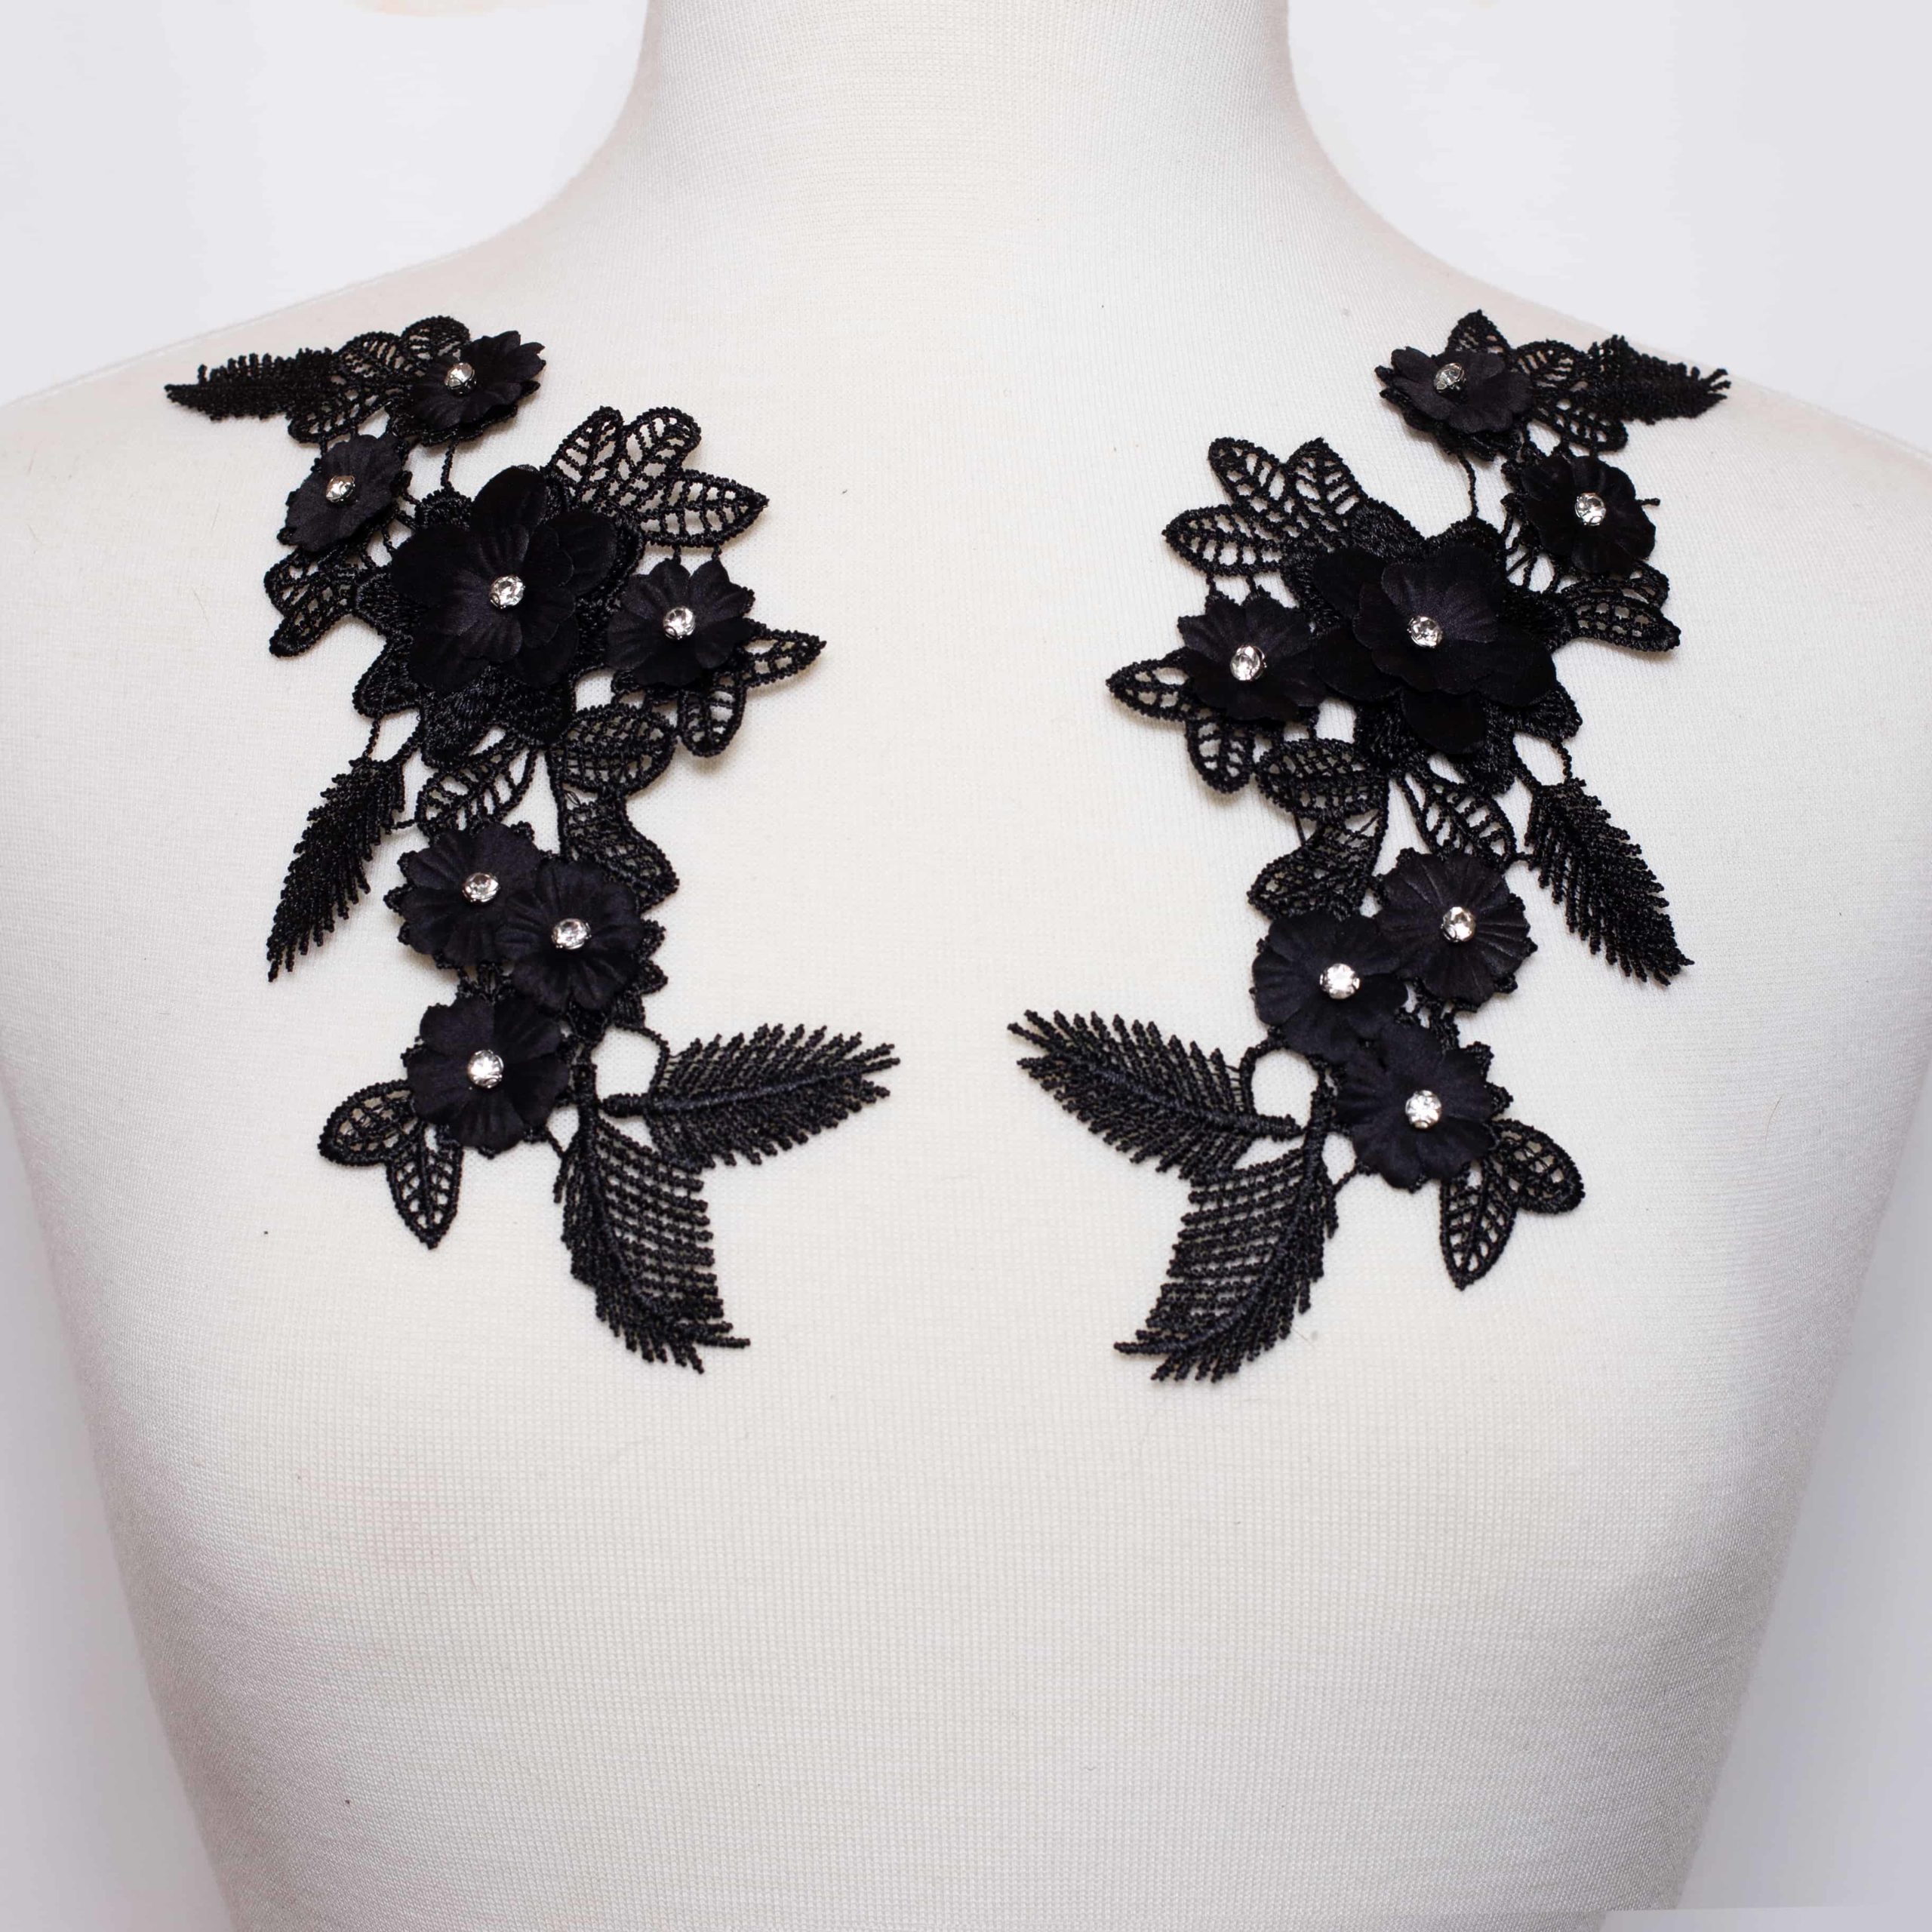 Matching 3D Floral Lace Appliques with Rhinestone Accents Black or ...